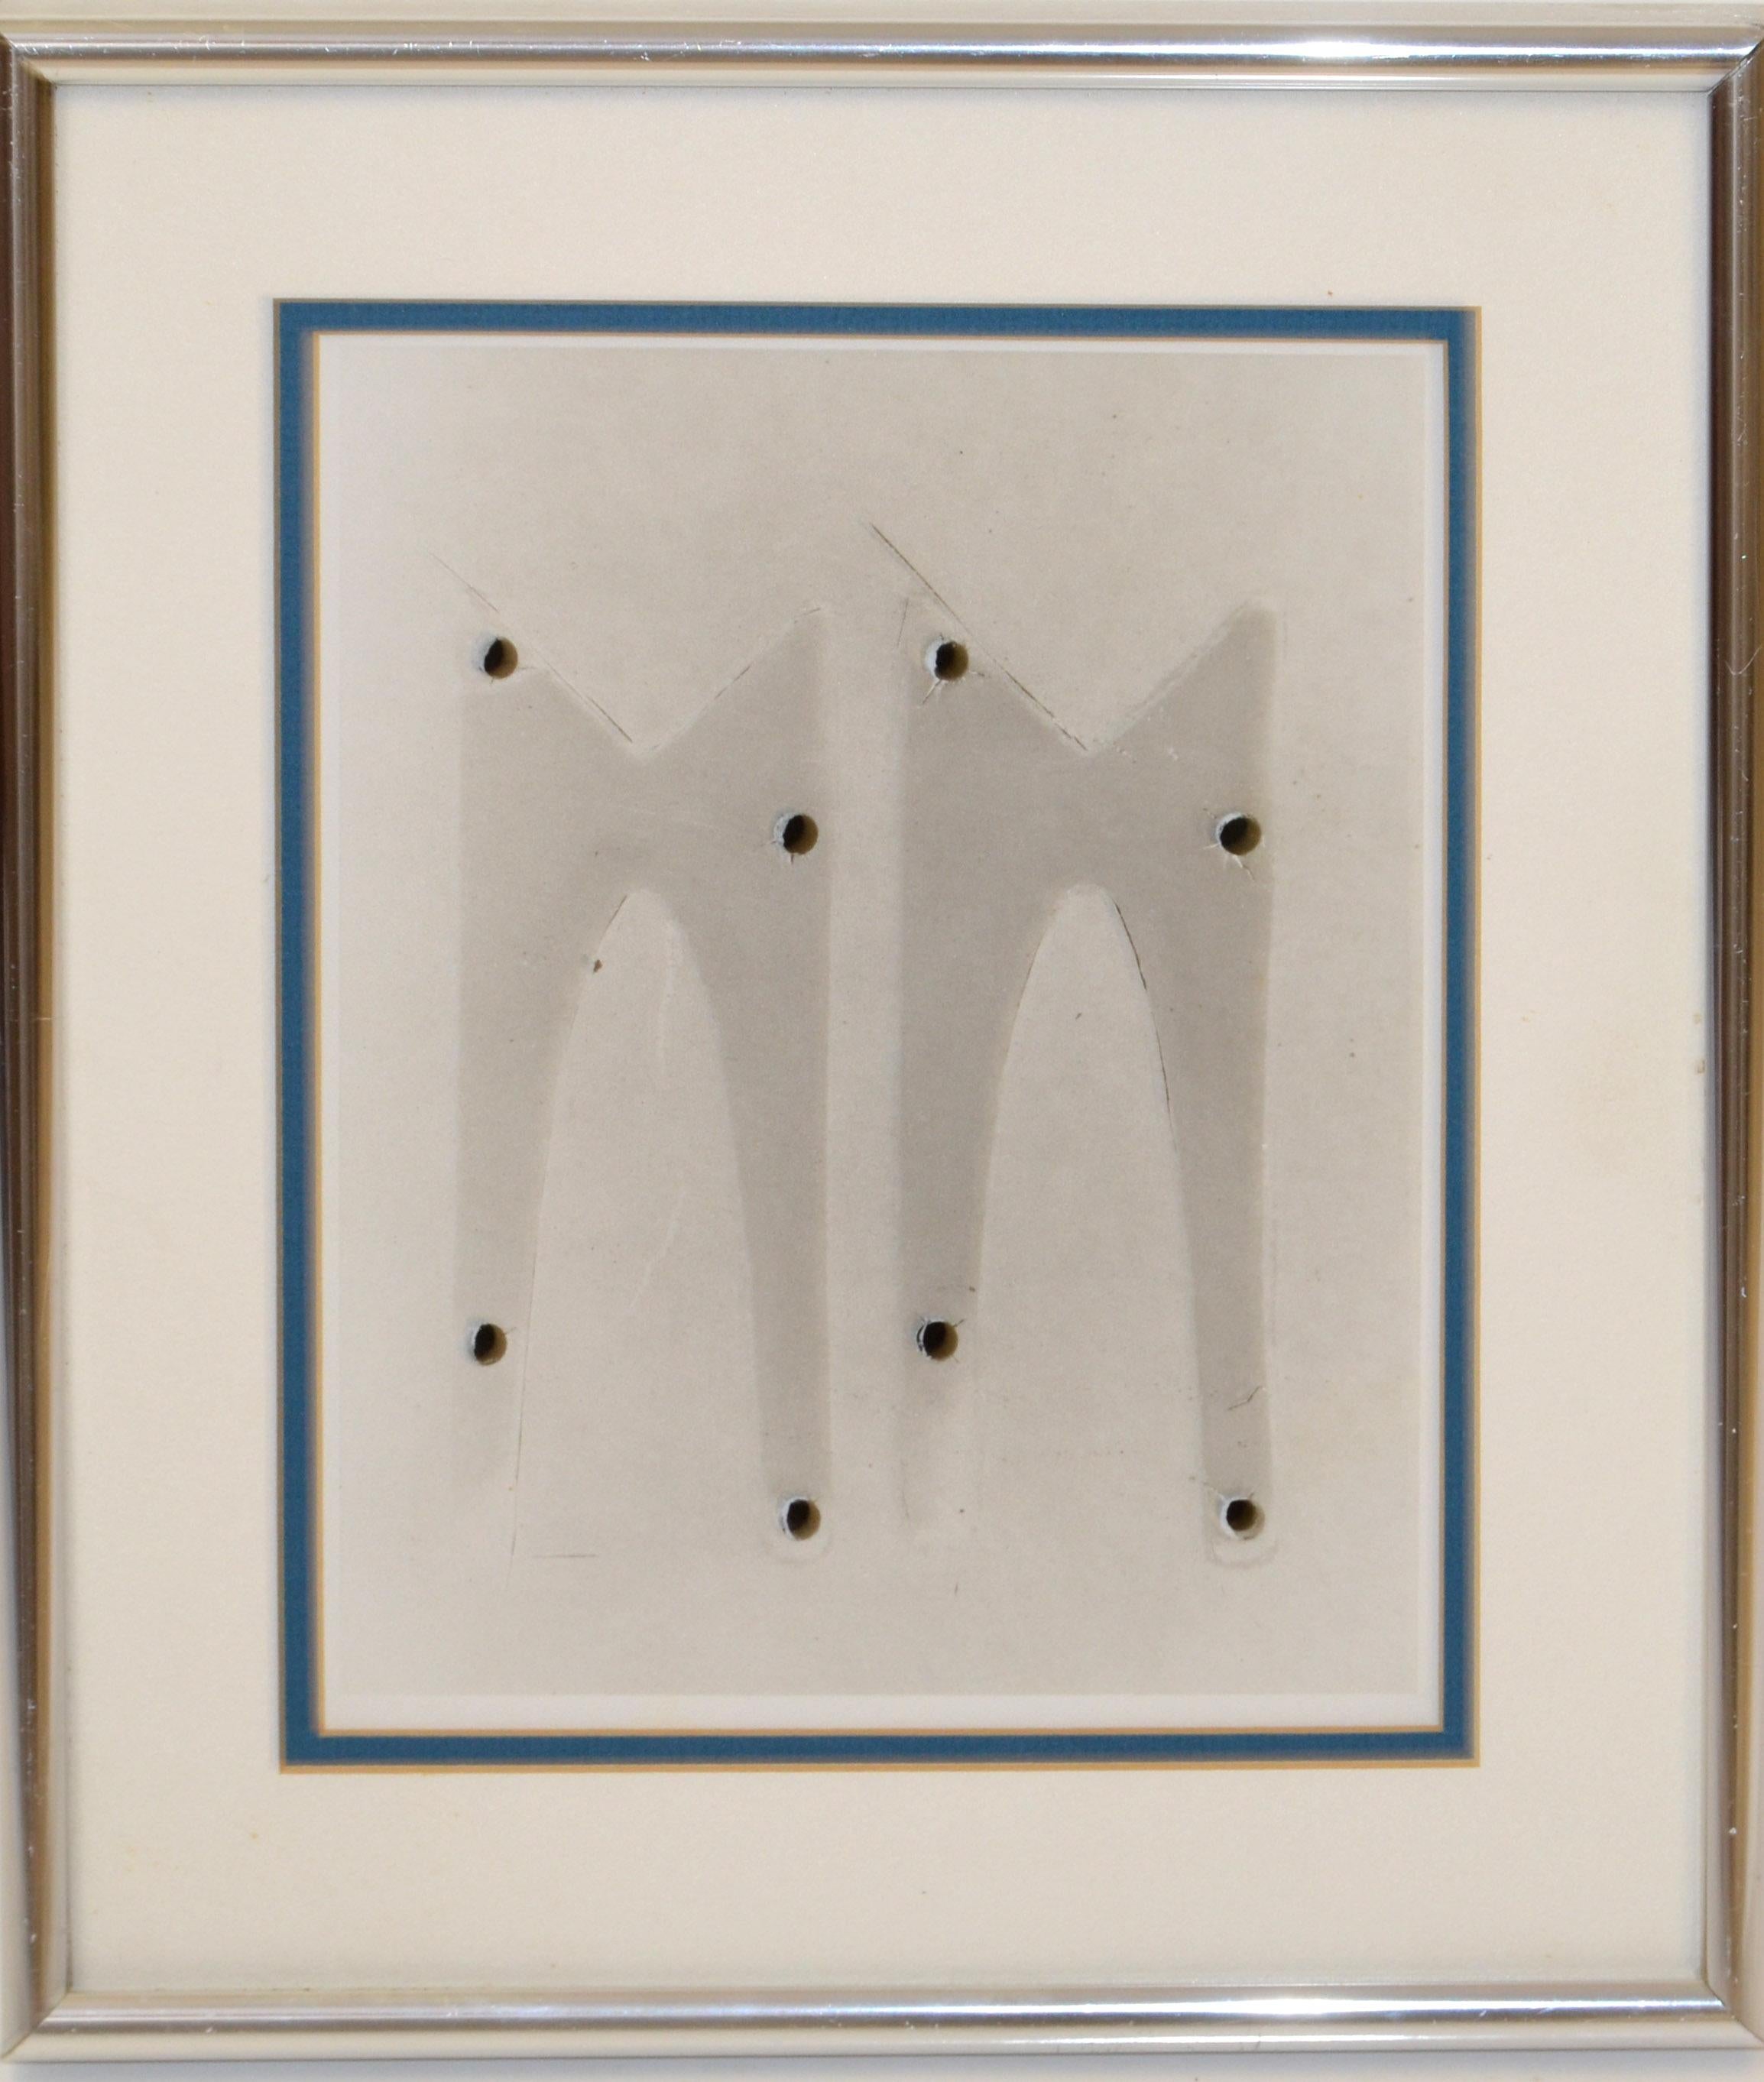 Hand-Crafted Mixed Media Chrome Framed Paper Cut Art Mid-Century Modern, 1980s For Sale